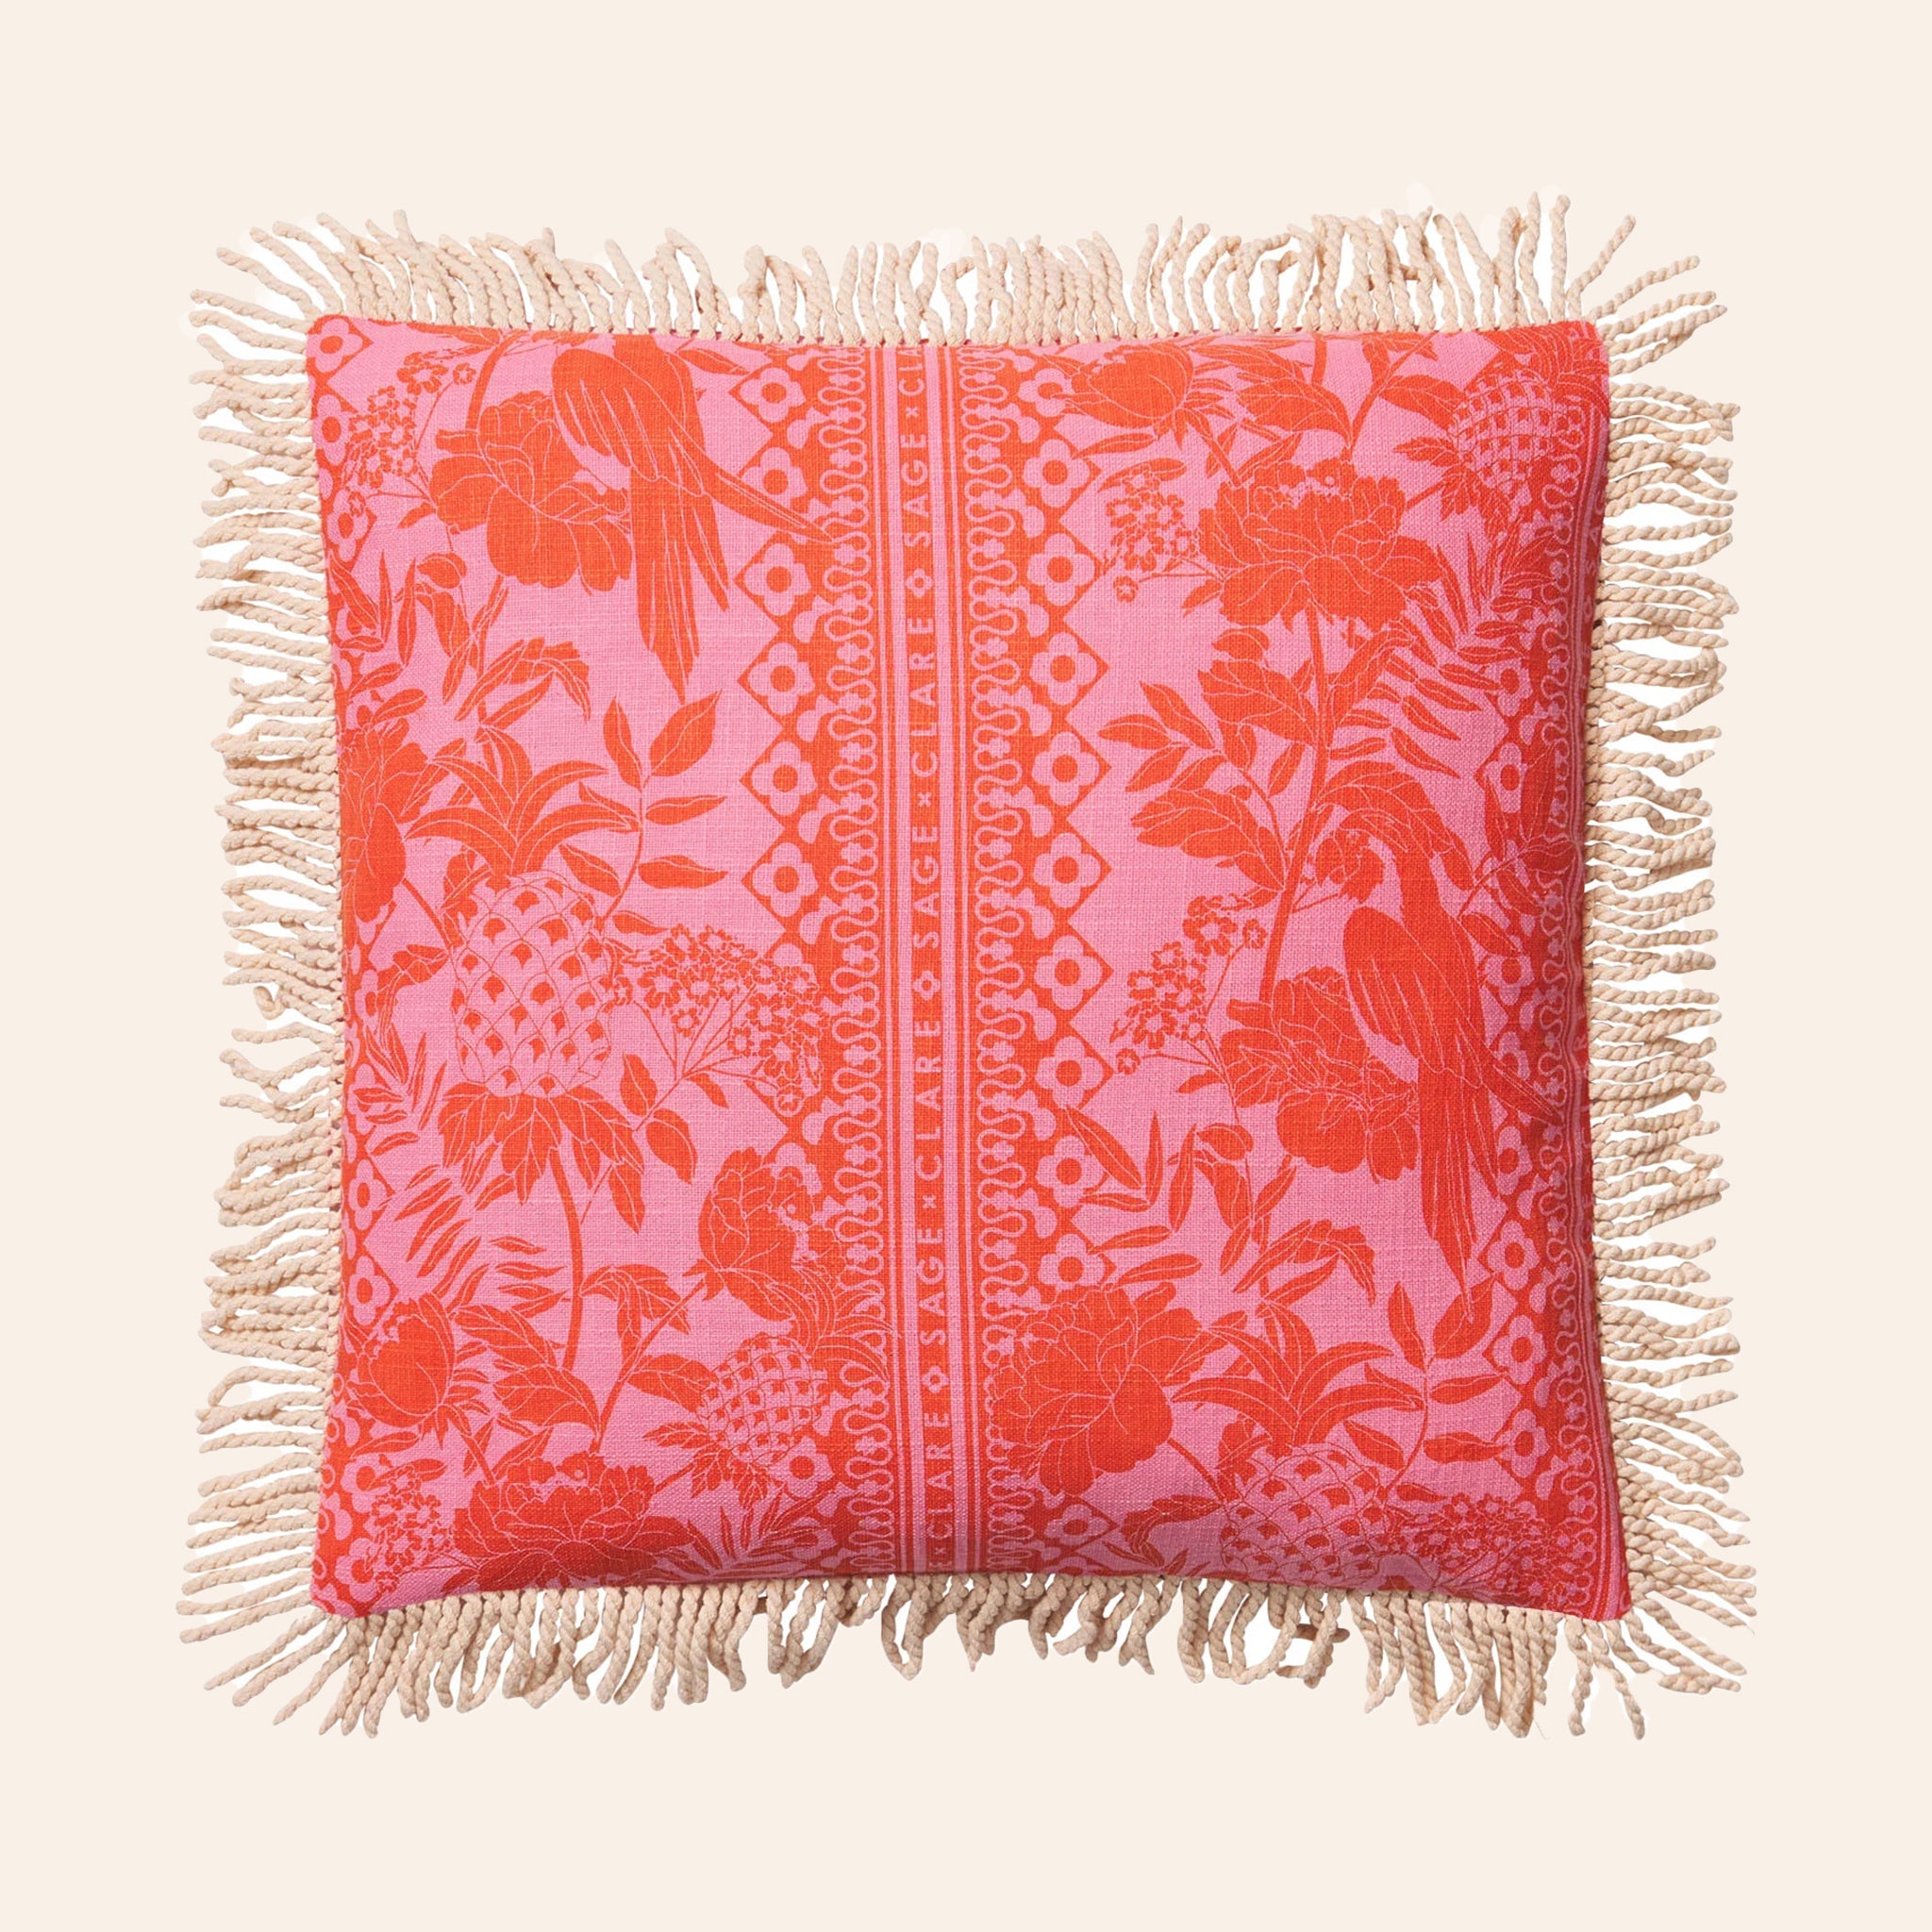 A pink and orange tropical print pillow with a. tassel edge. 